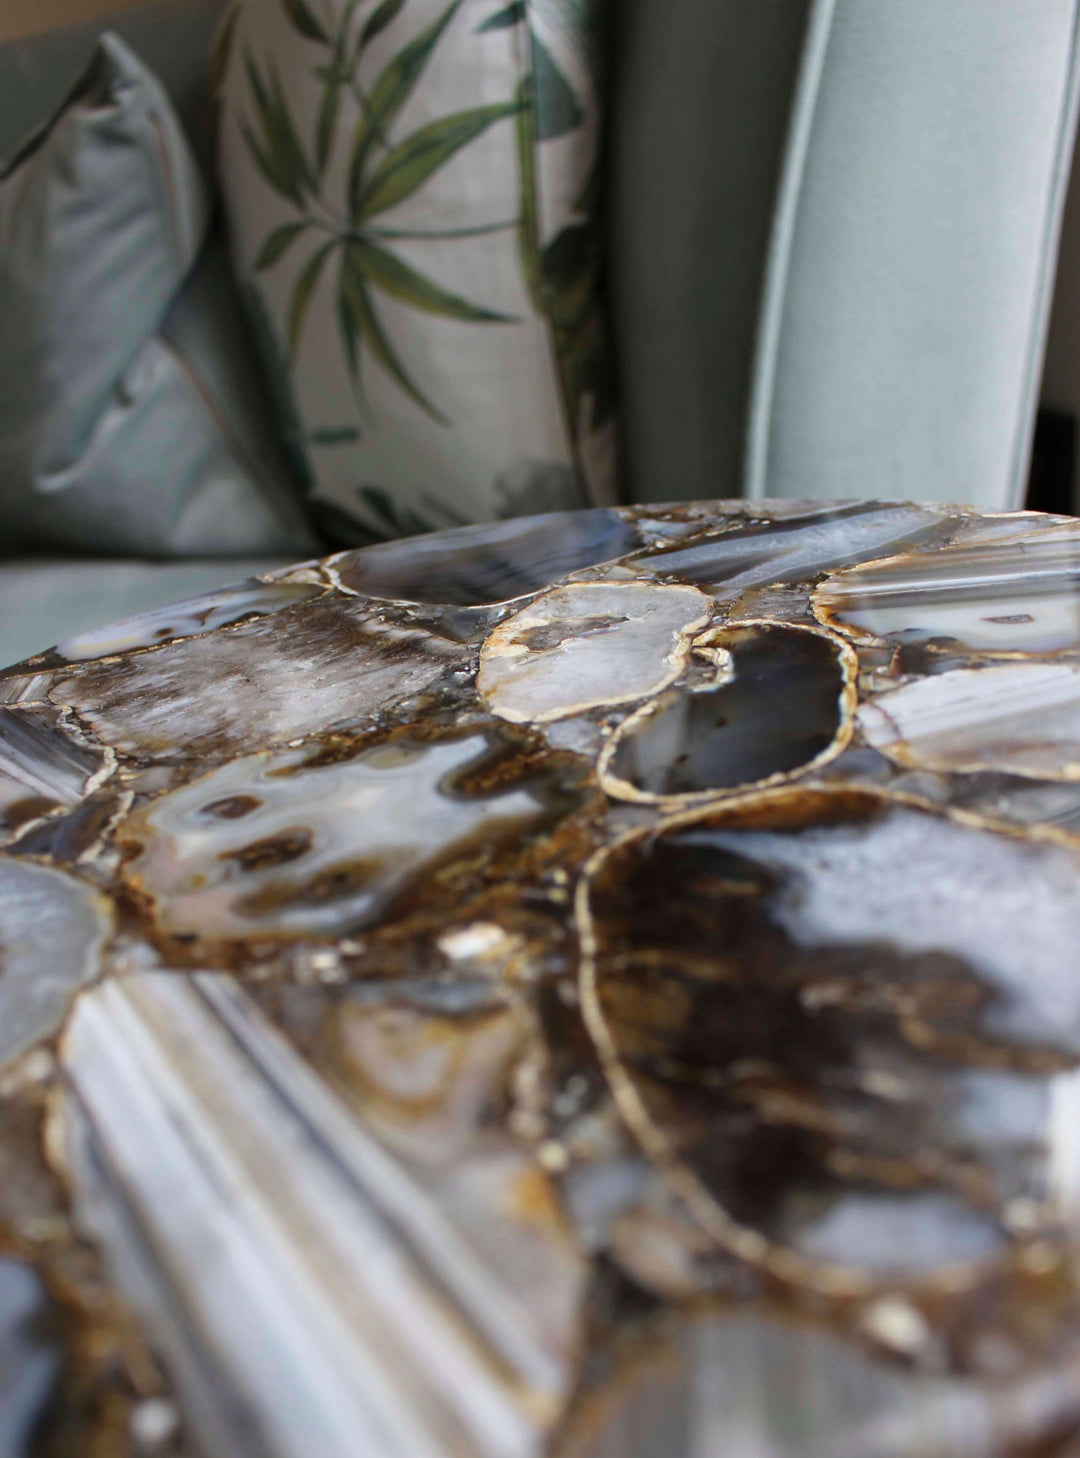 Blue, black and white Agate Table, Coffee table made of stone 